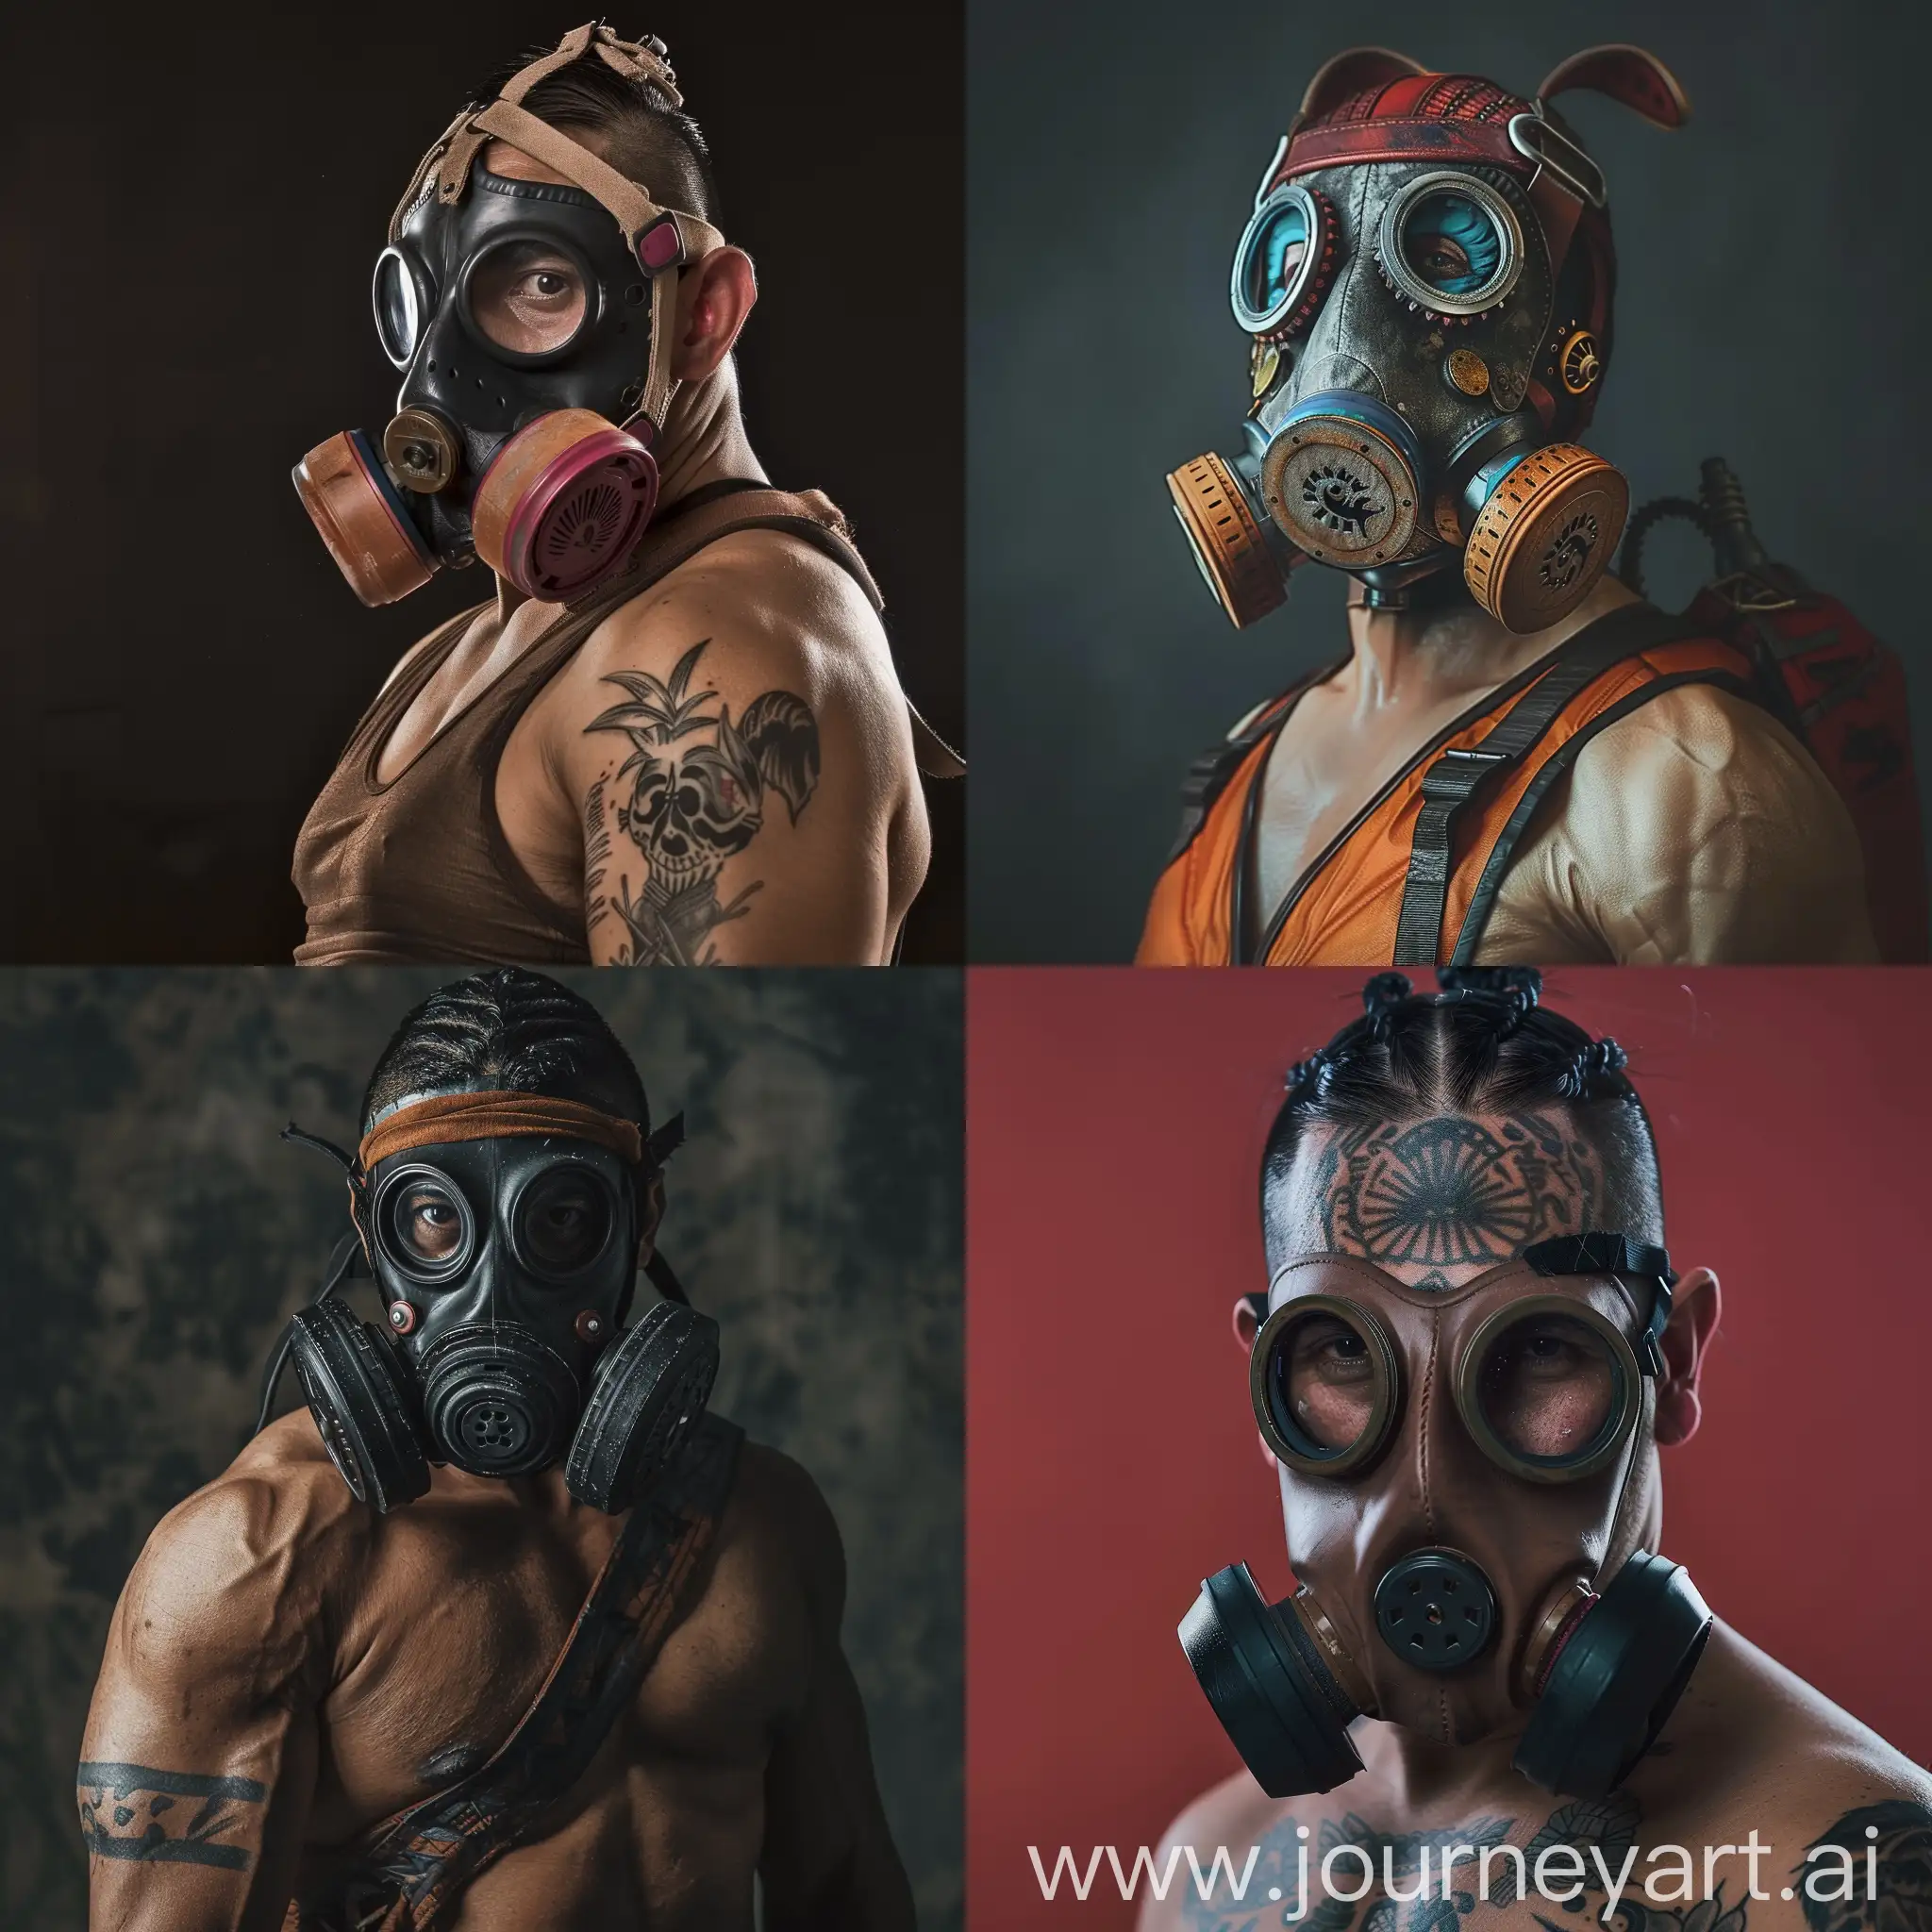 Mexican-Wrestler-Wearing-Gas-Mask-in-Dramatic-Portrait